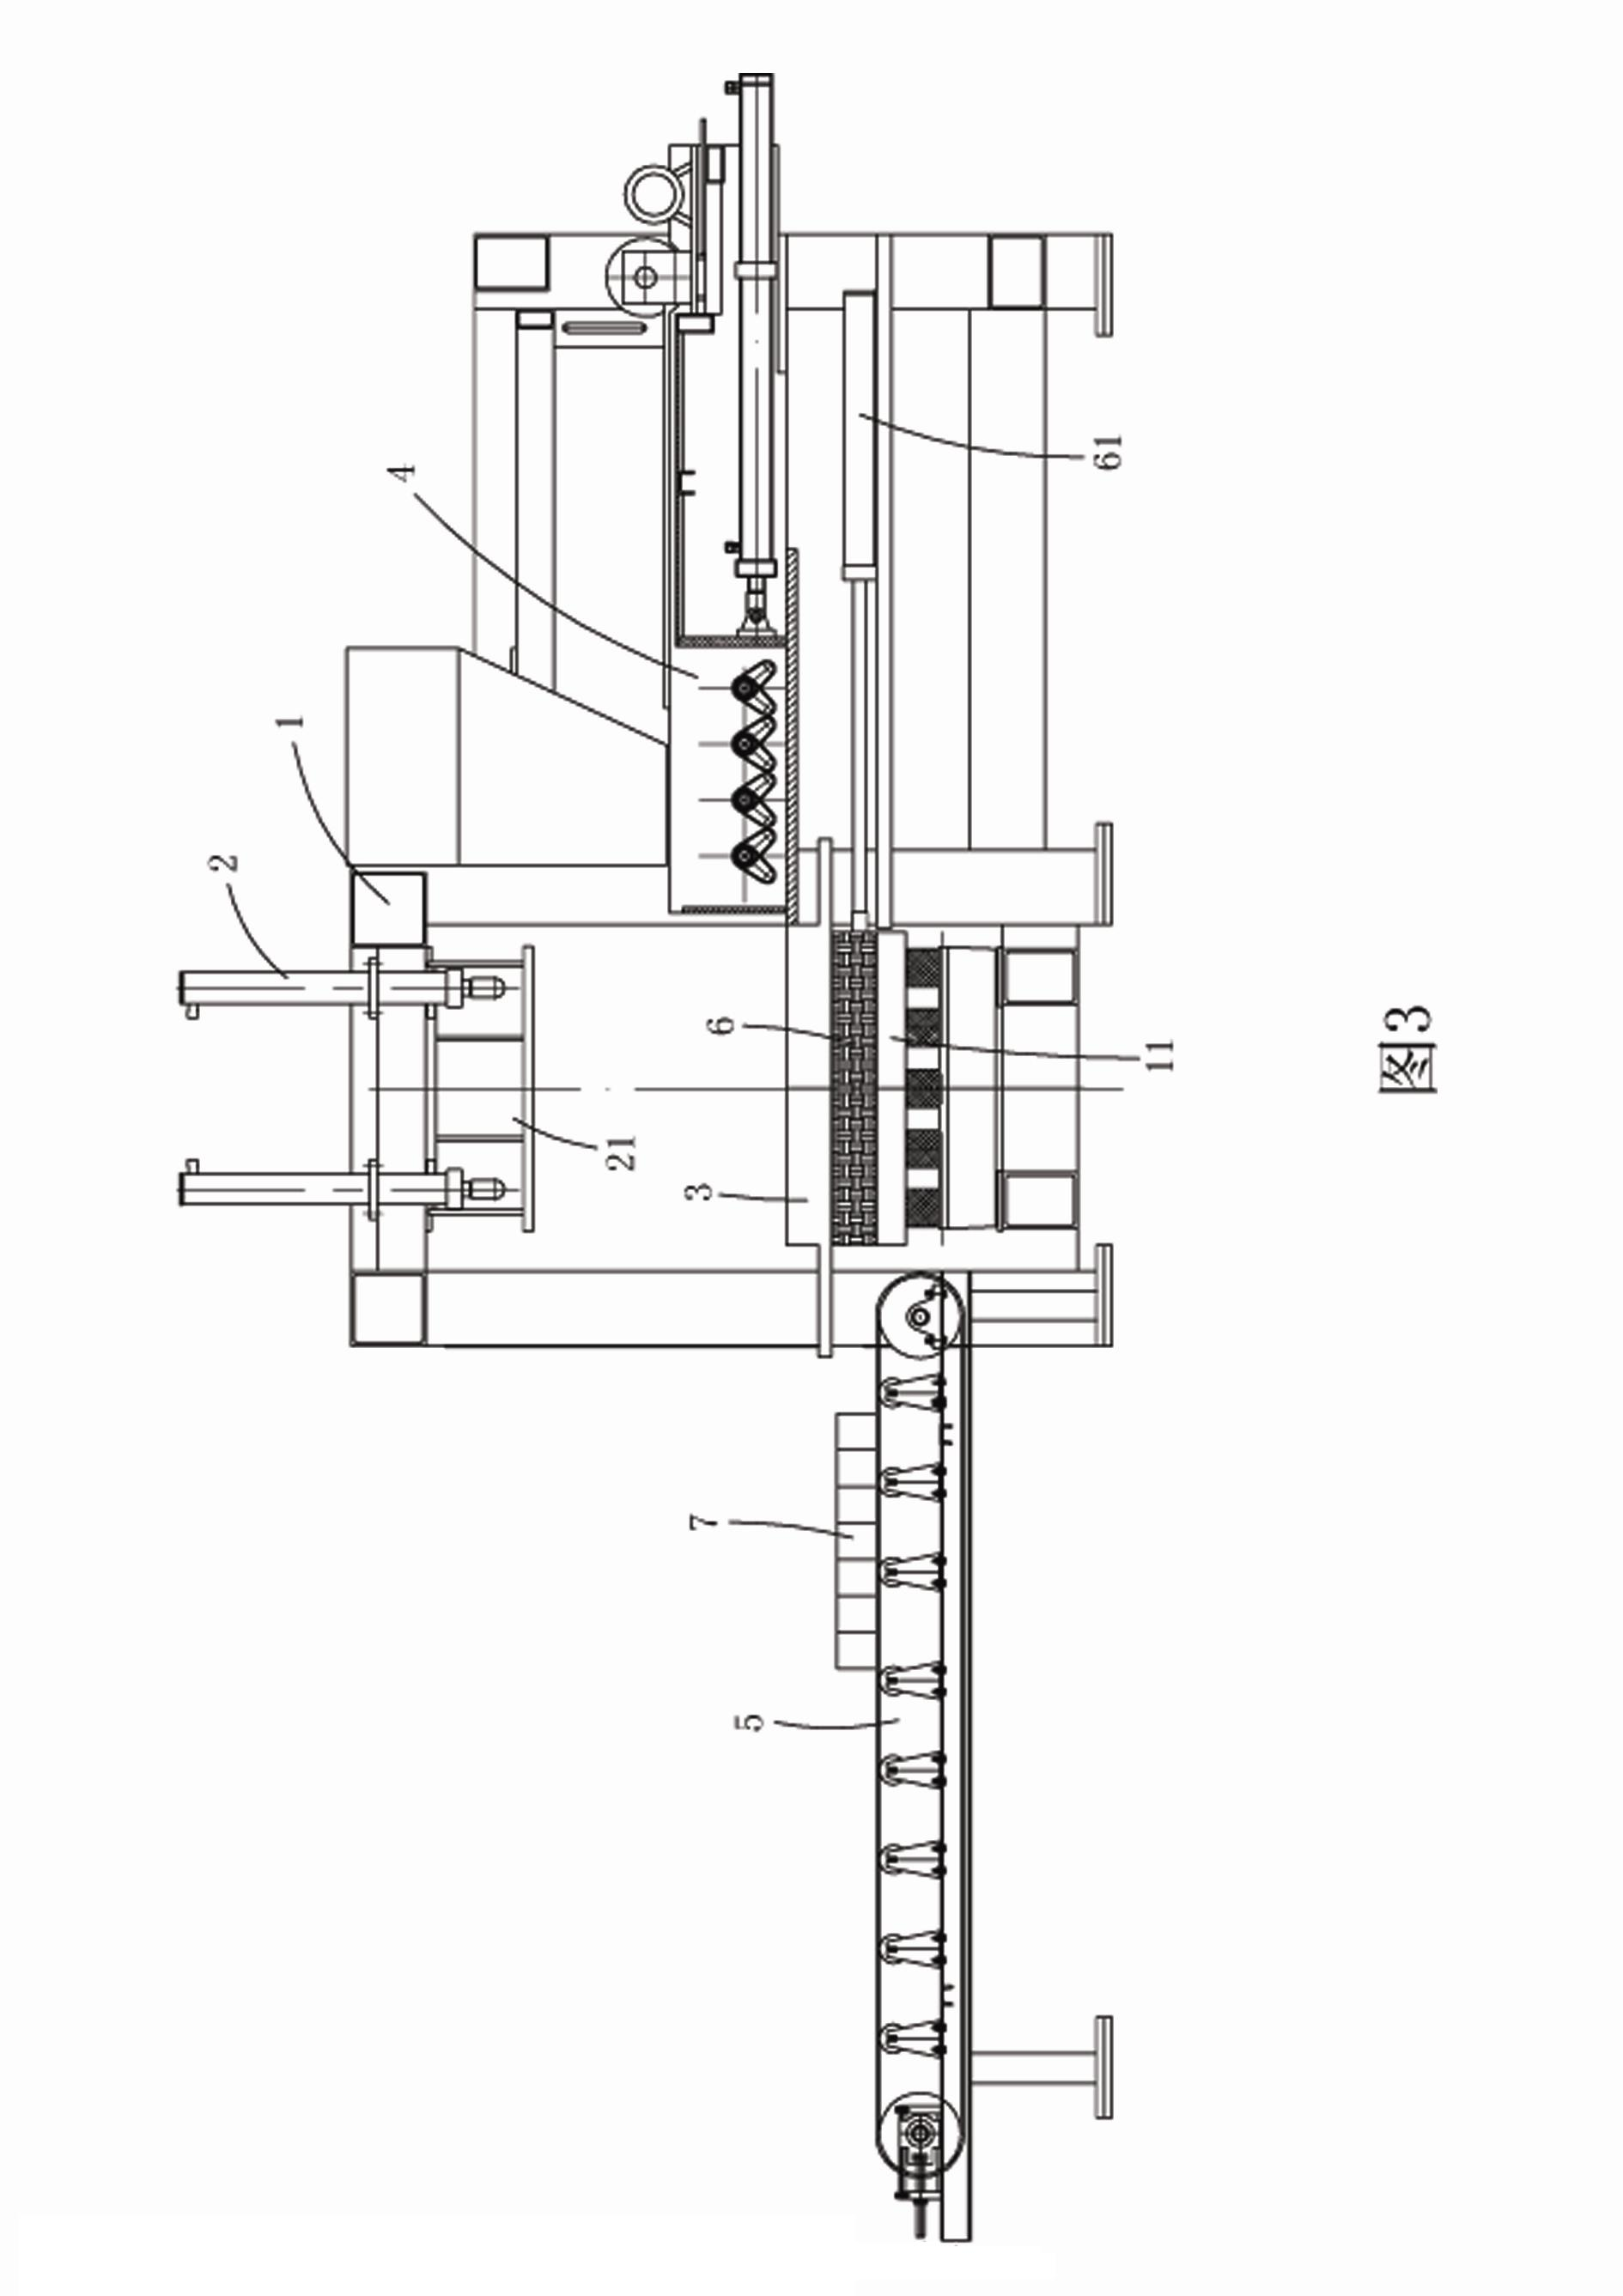 Method and equipment for pressing and forming building blocks